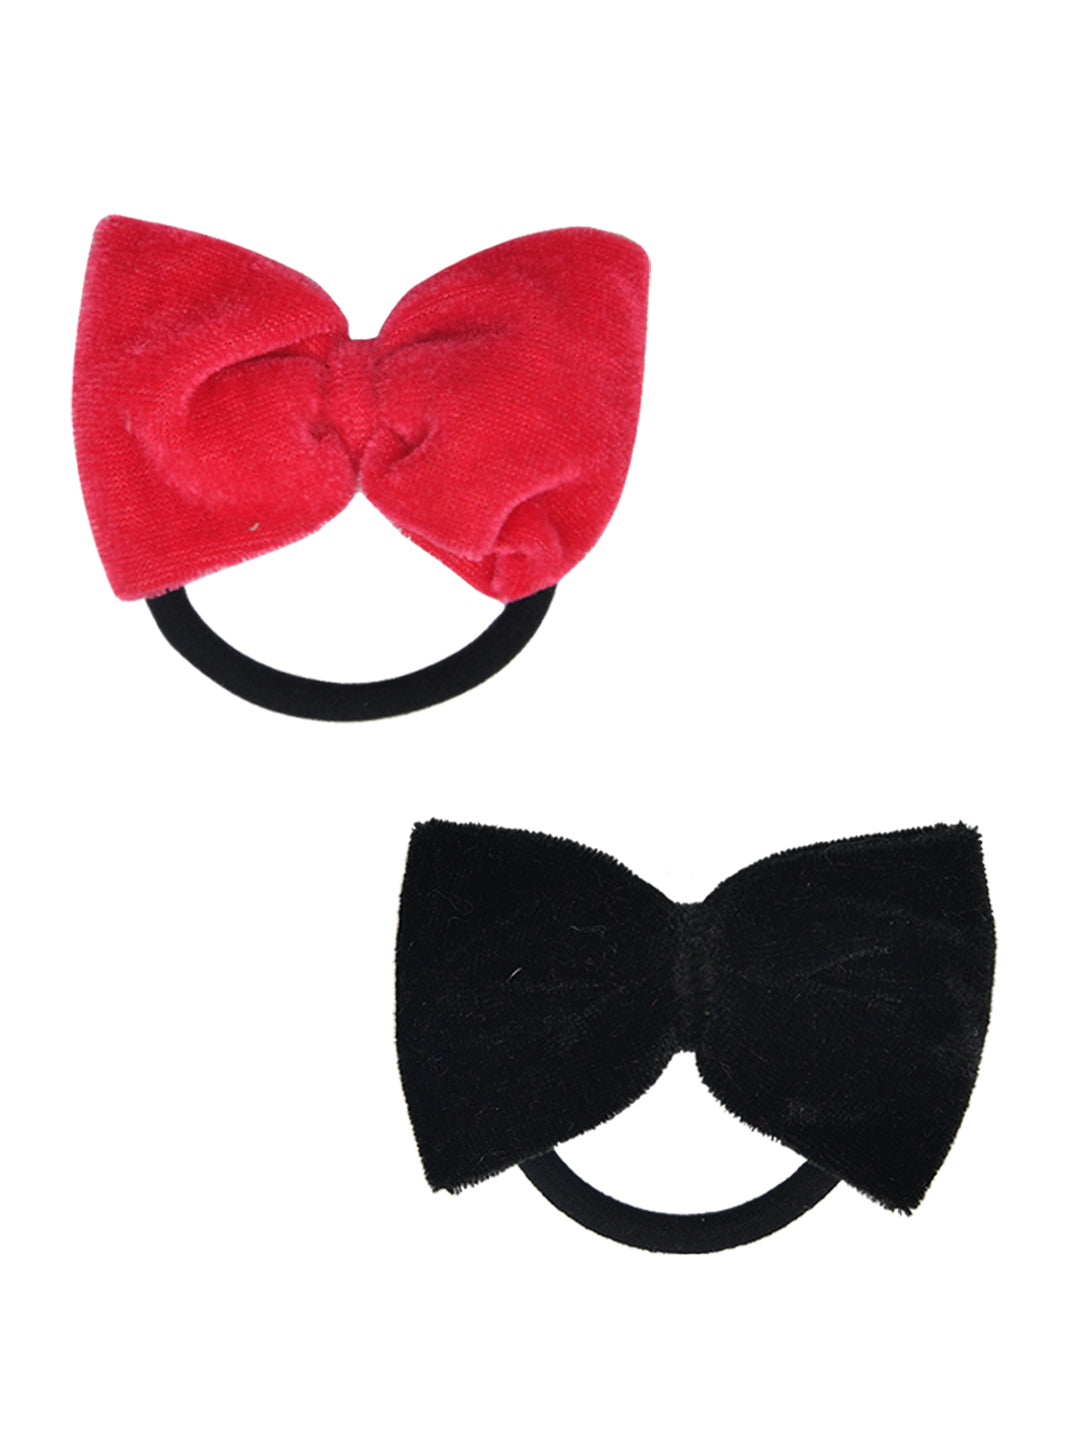 Set of 2 Multicolor Bow Hair Ties for Girls